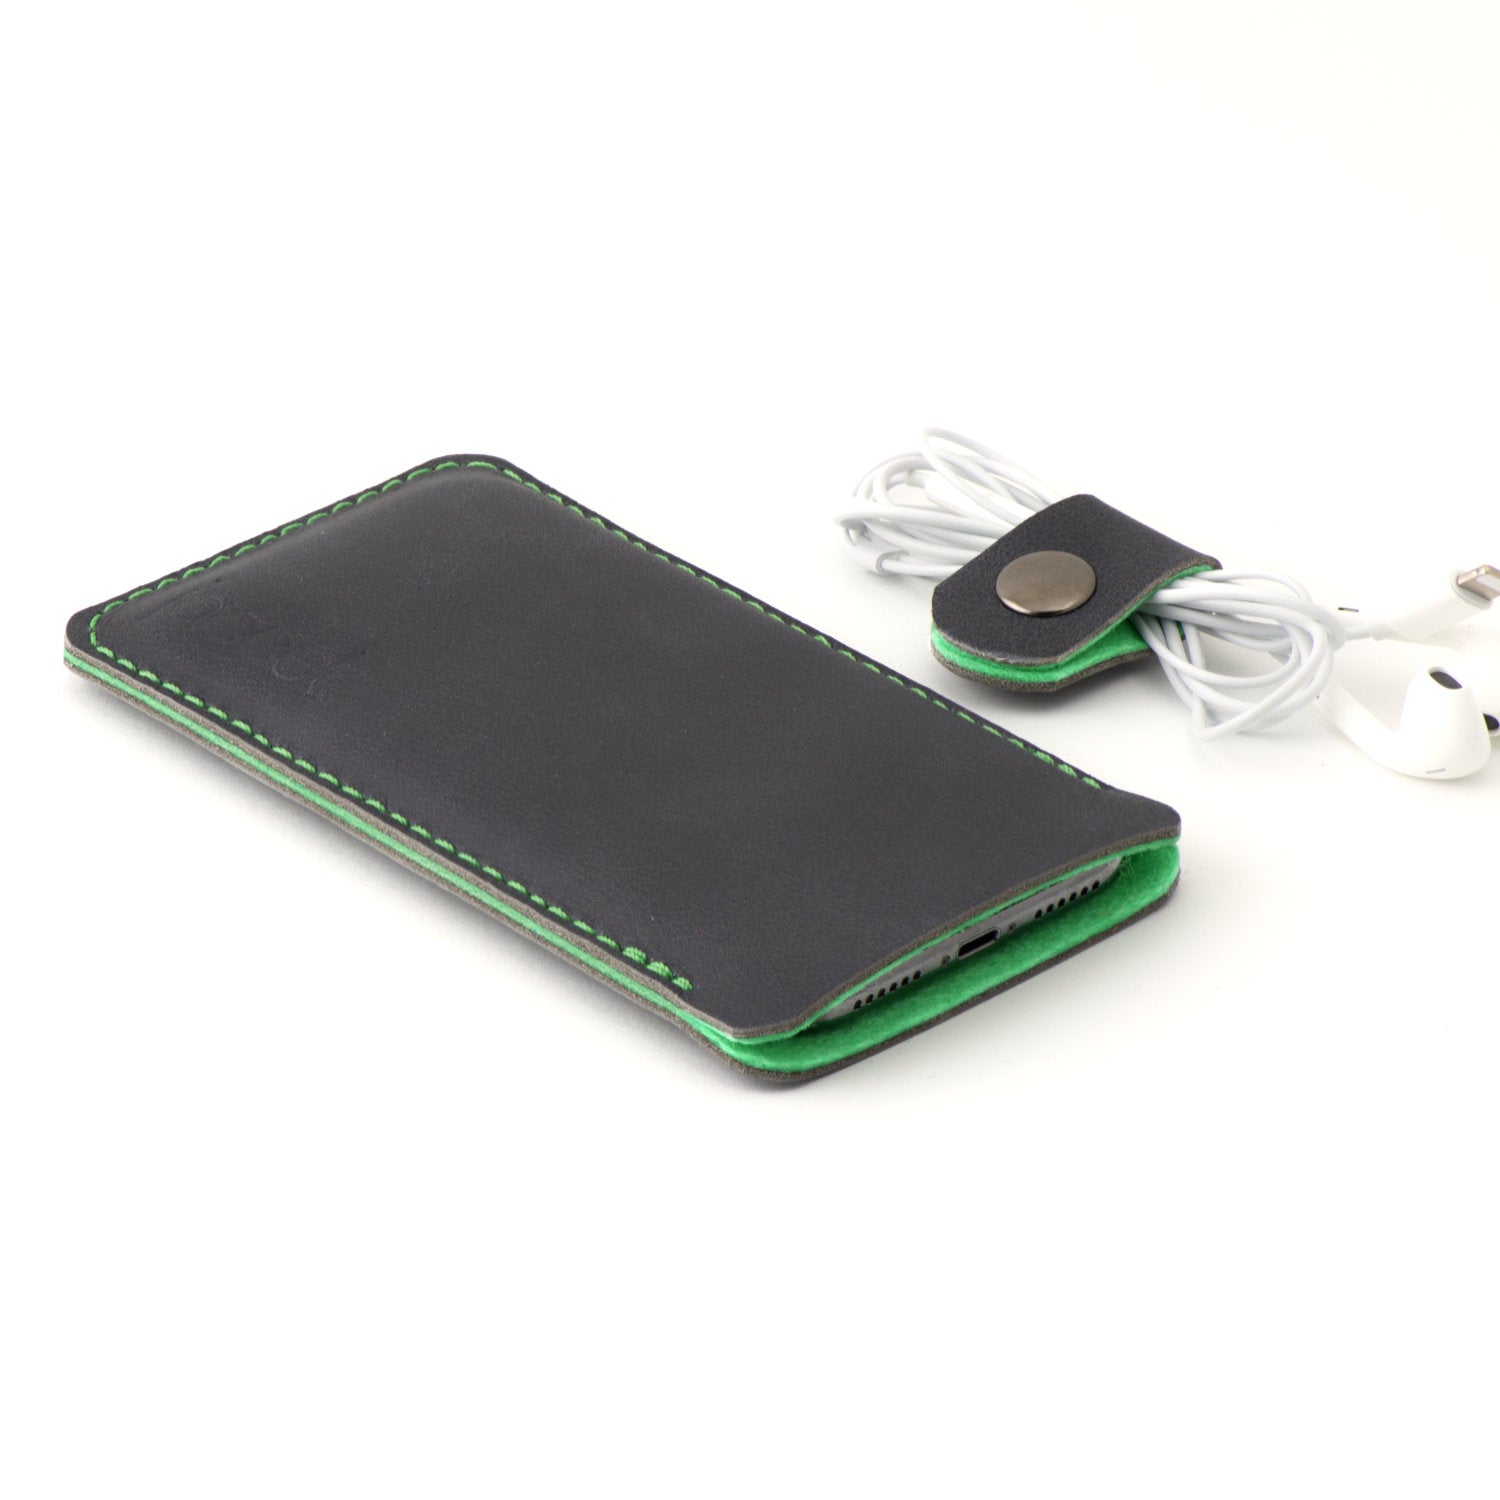 JACCET leather iPhone sleeve - anthracite/black leather with green wool felt. 100% Handmade